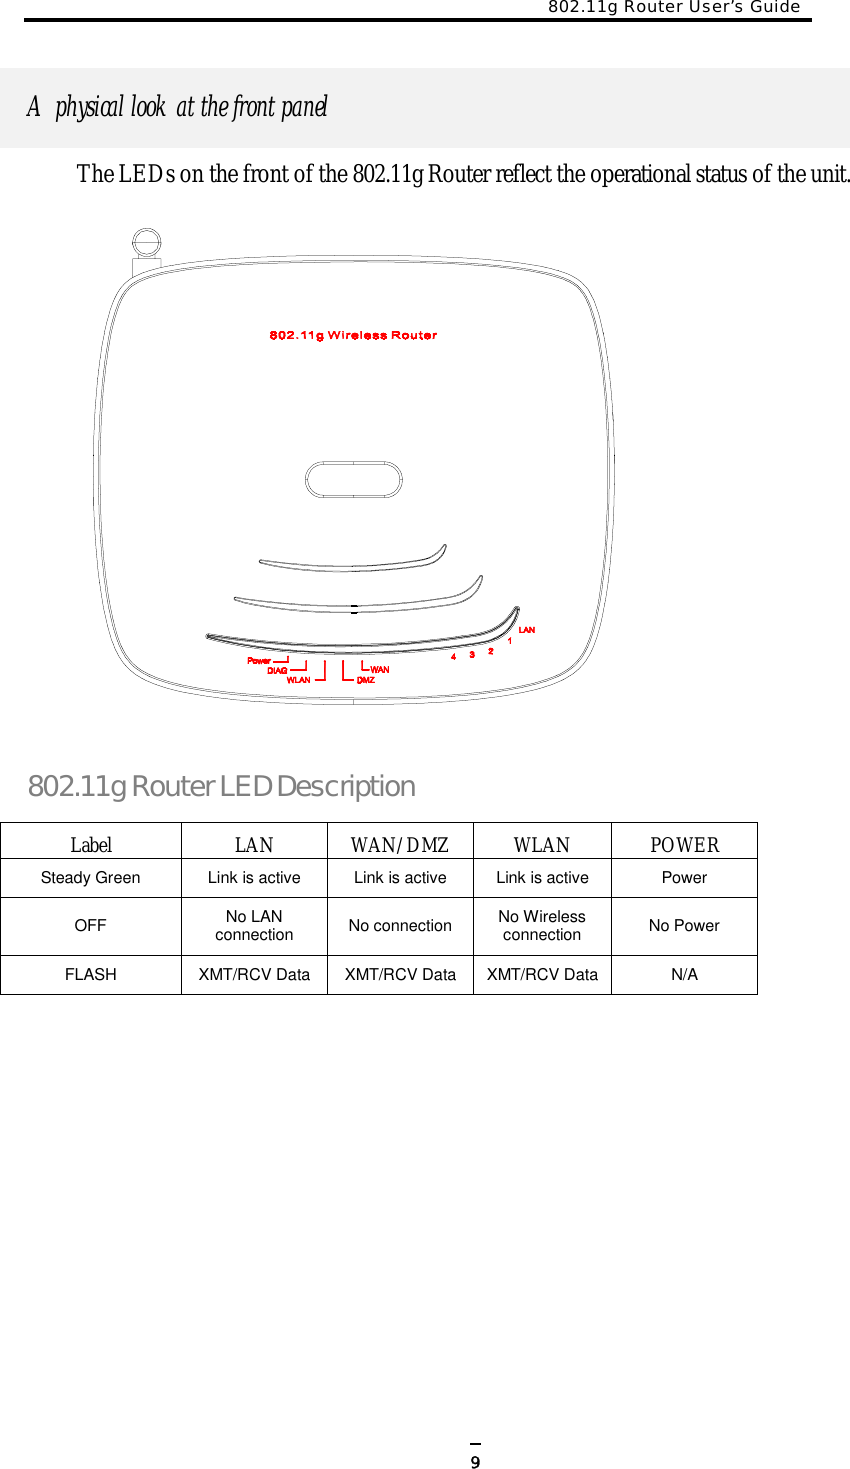 802.11g Router User’s Guide   9A physical look at the front panel The LEDs on the front of the 802.11g Router reflect the operational status of the unit.   802.11g Router LED Description Label LAN WAN/DMZ WLAN POWER Steady Green   Link is active  Link is active  Link is active  Power OFF  No LAN connection  No connection  No Wireless connection  No Power FLASH  XMT/RCV Data  XMT/RCV Data XMT/RCV Data N/A   